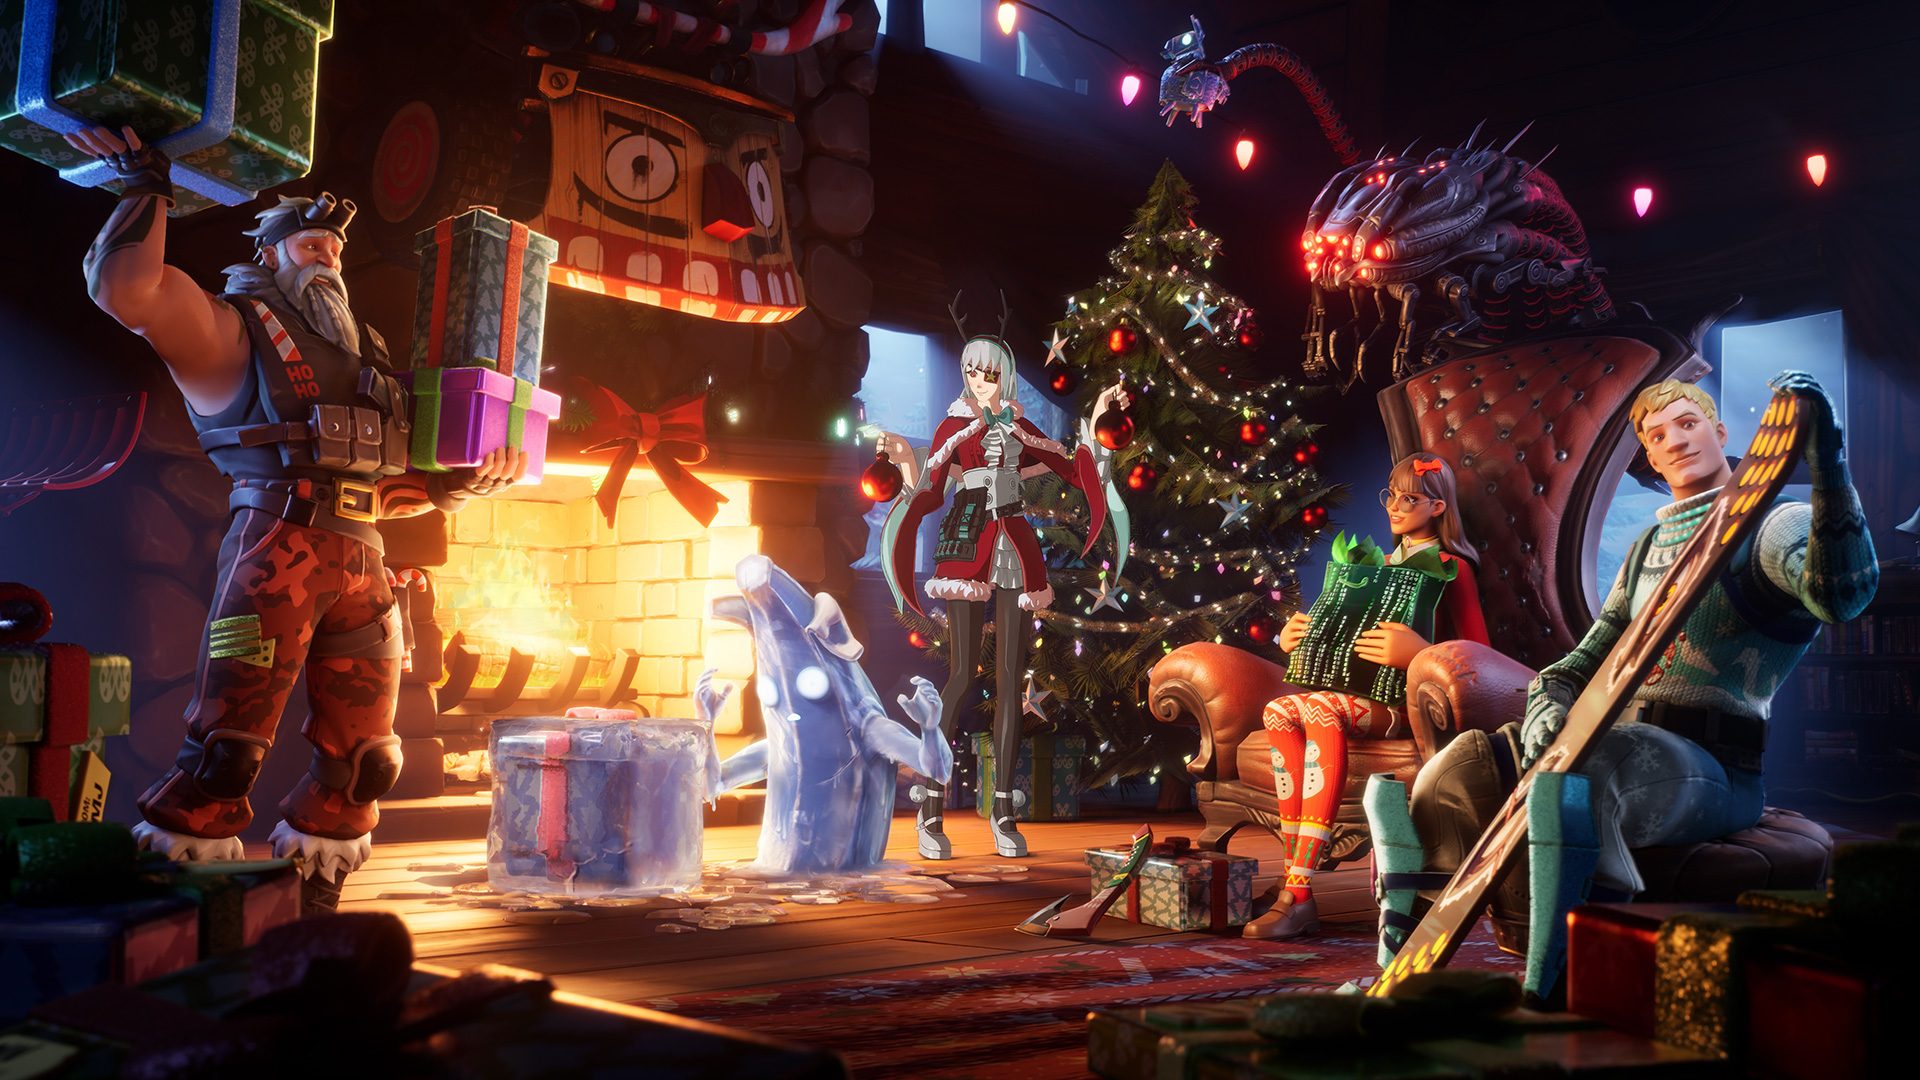 Complete Holiday Quests, Battle With Unvaulted Items, And More In Fortnite’s 2021 Winterfest thumbnail